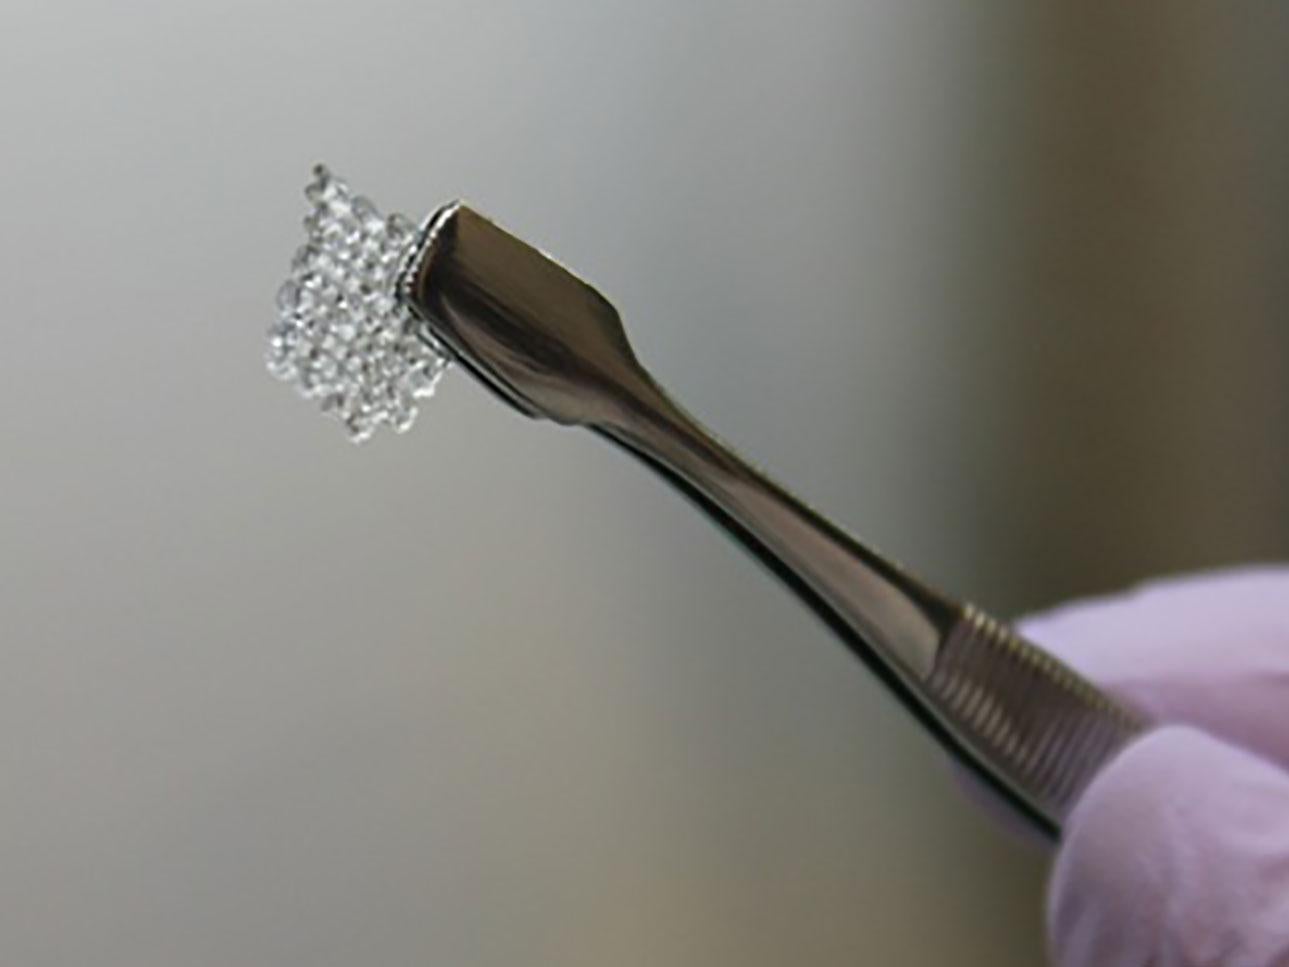 A scaffold for a bioprosthetic mouse ovary 3D-printed with gelatin